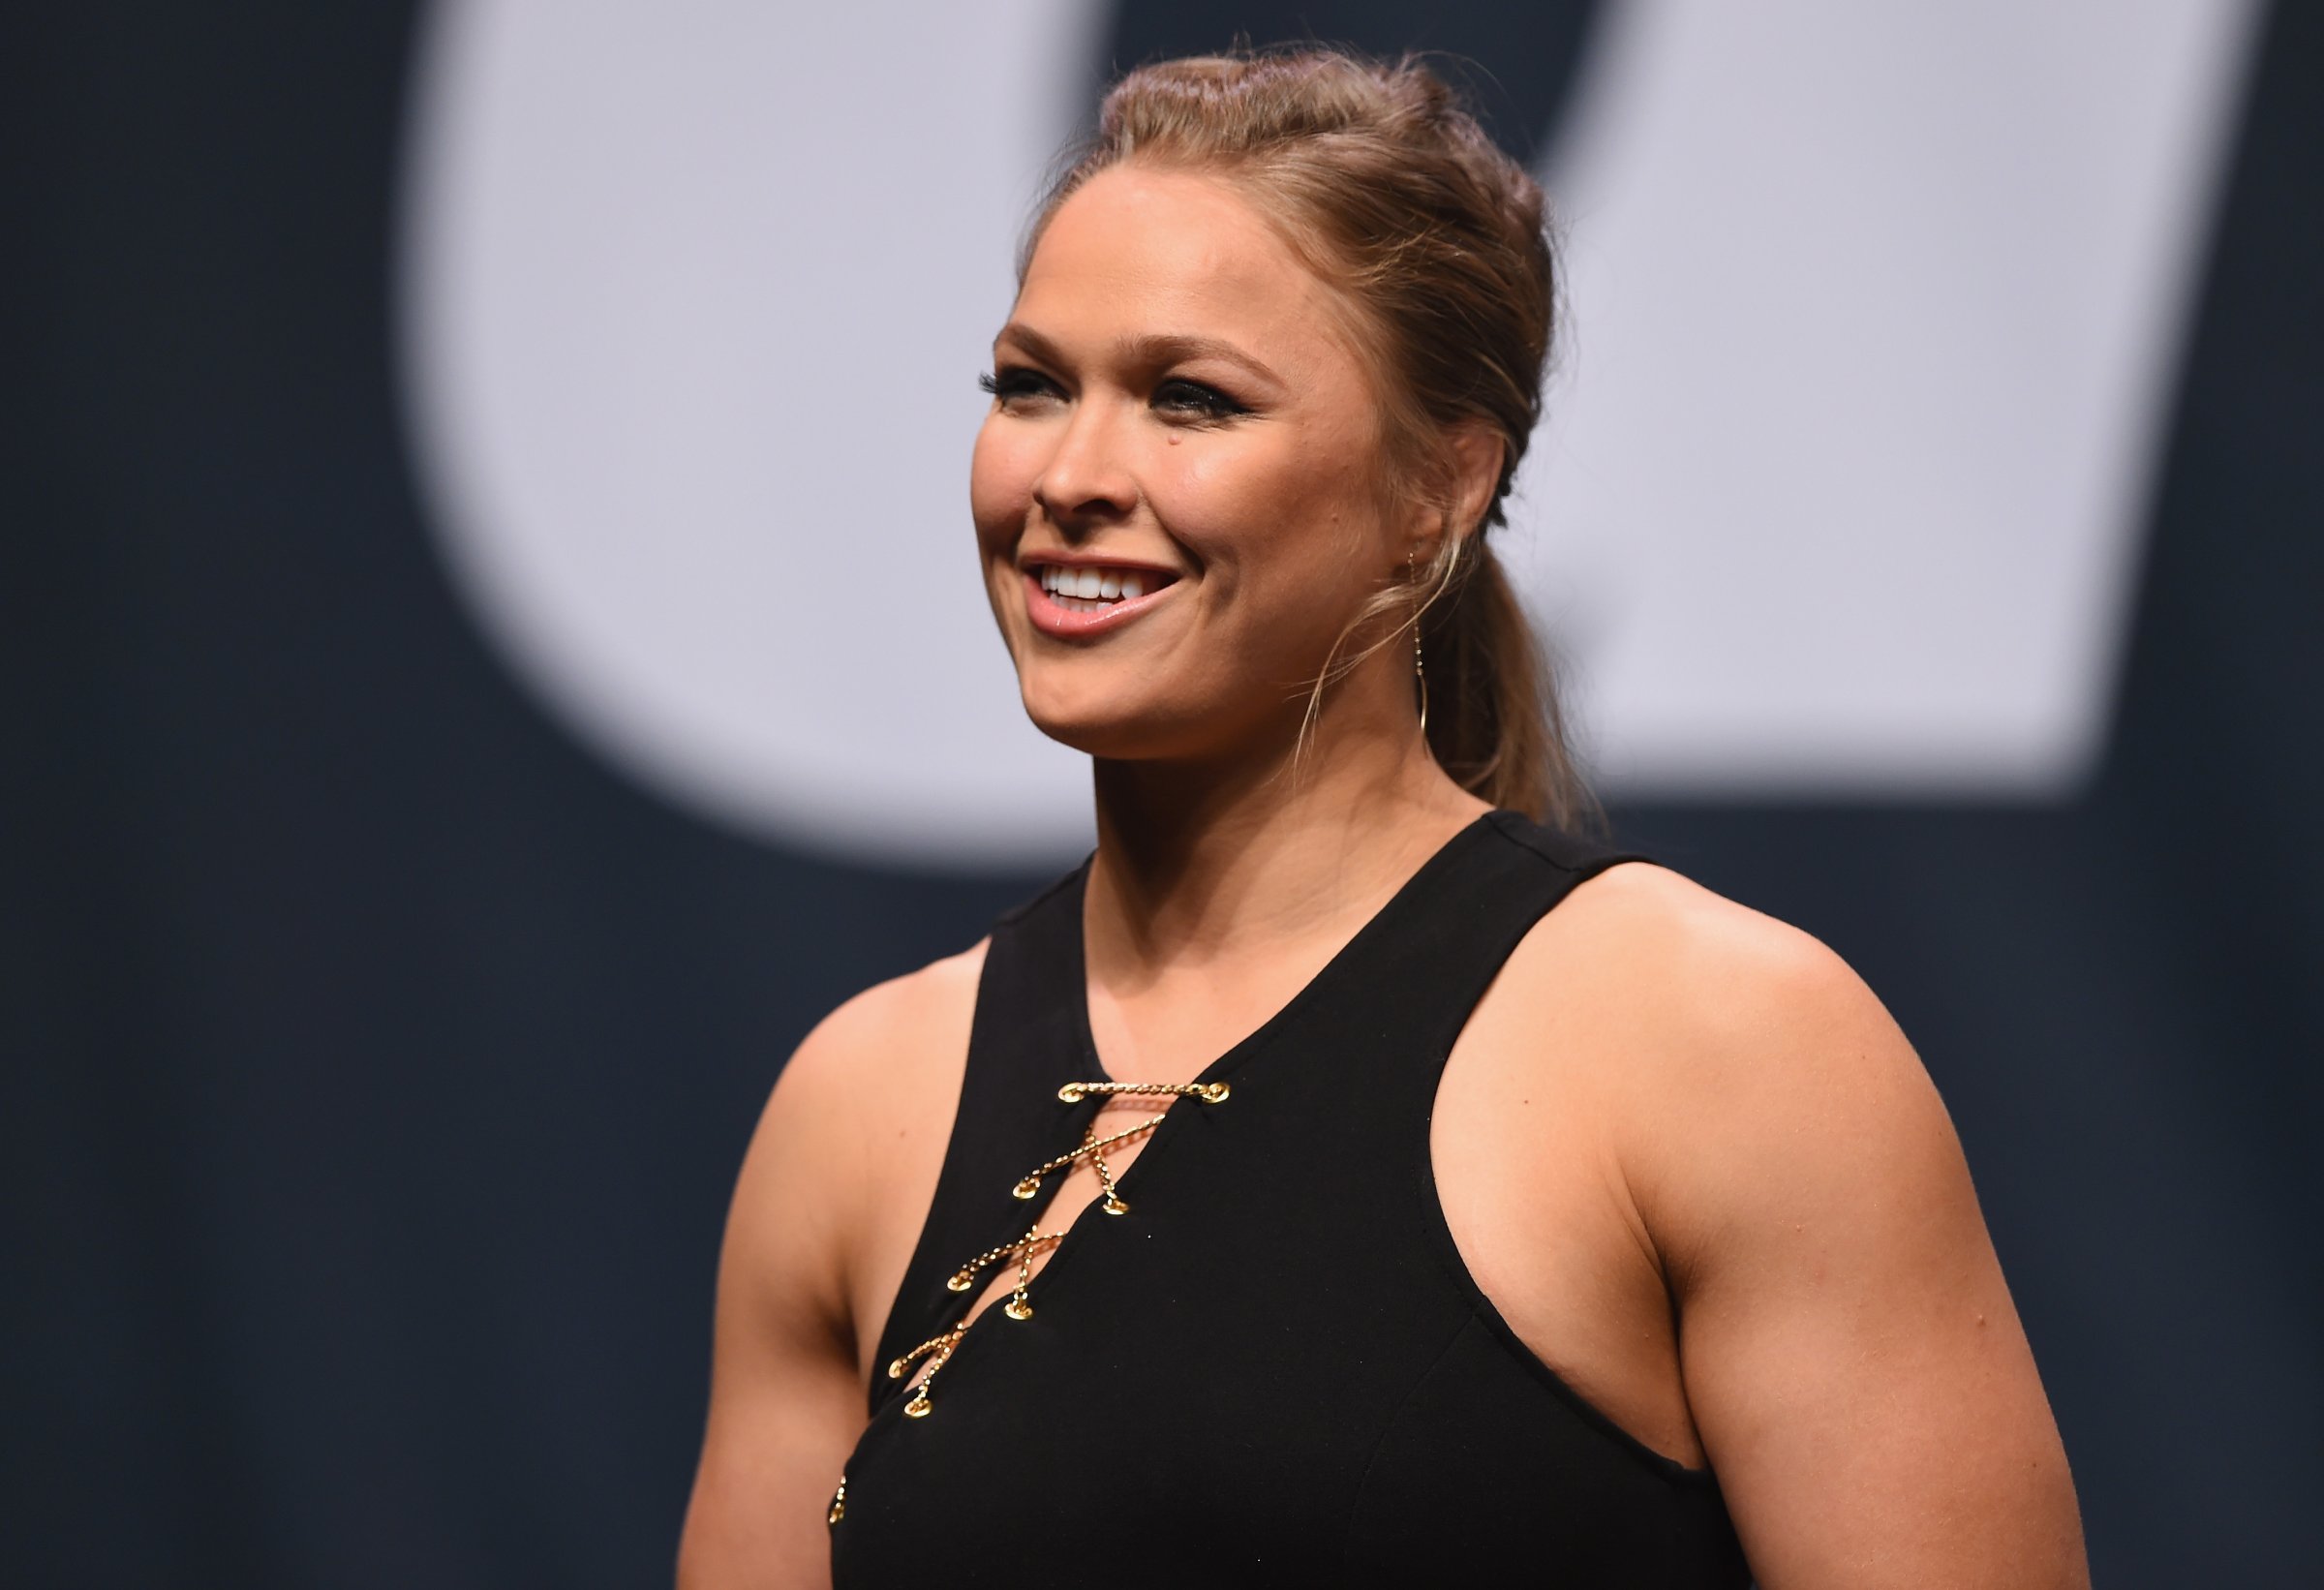 Ronda Rousey at the UFC's Go Big launch event in Las Vegas on Sept. 4, 2015.